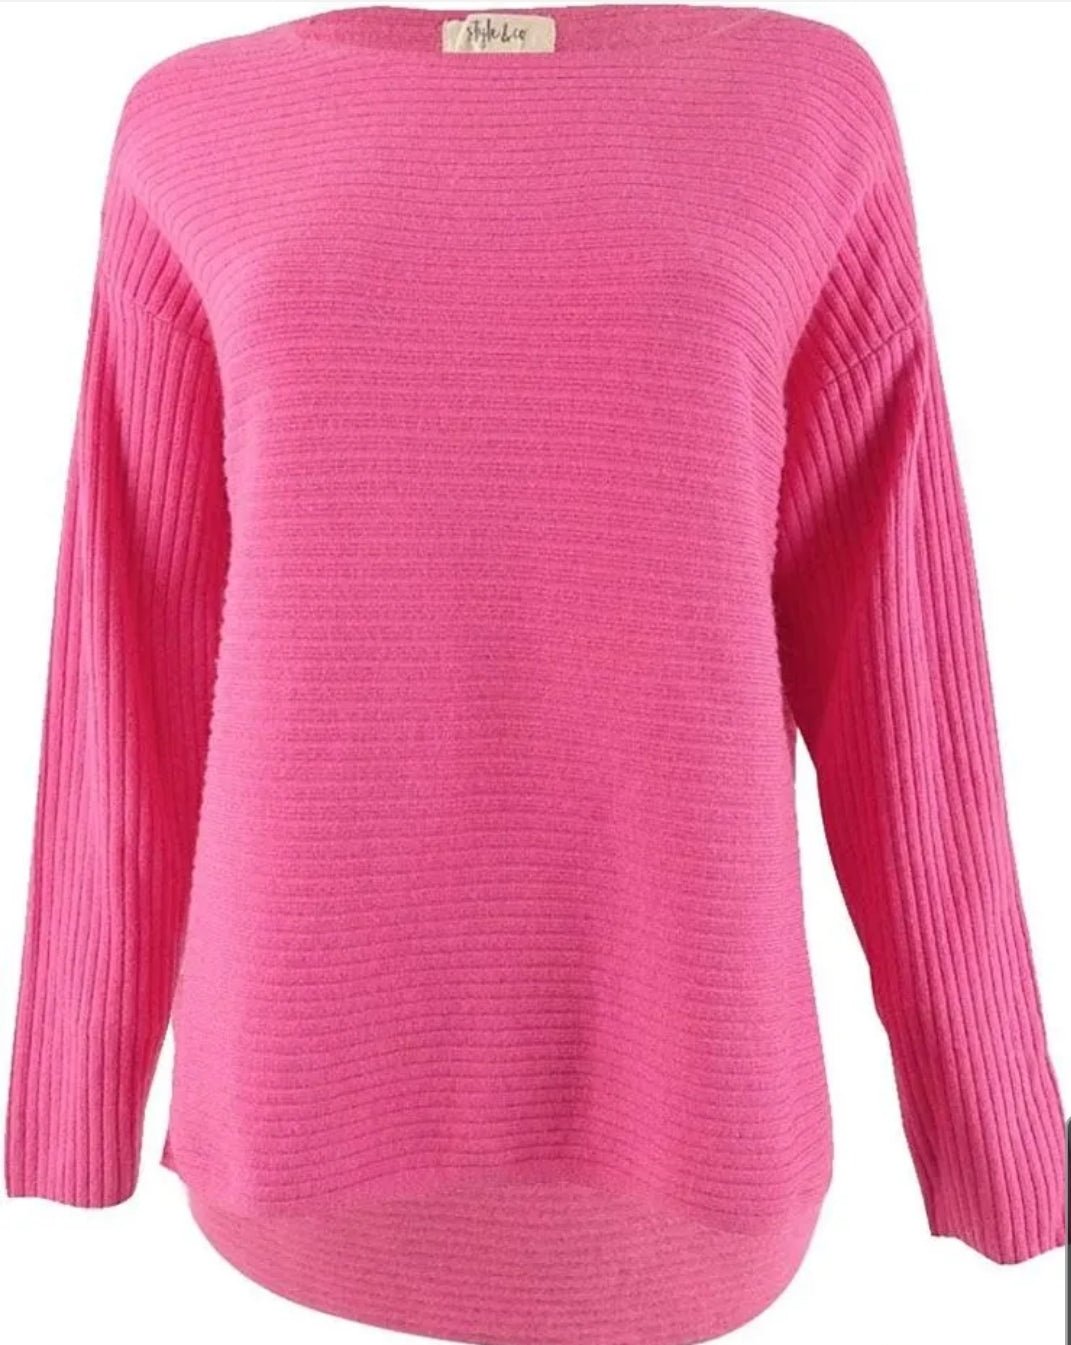 Style & Co Sweater Boatneck Rib Pullover Pink Large - BELLEZA'S - Style & Co Sweater Boatneck Rib Pullover Pink Large - BELLEZA'S - Sweater -